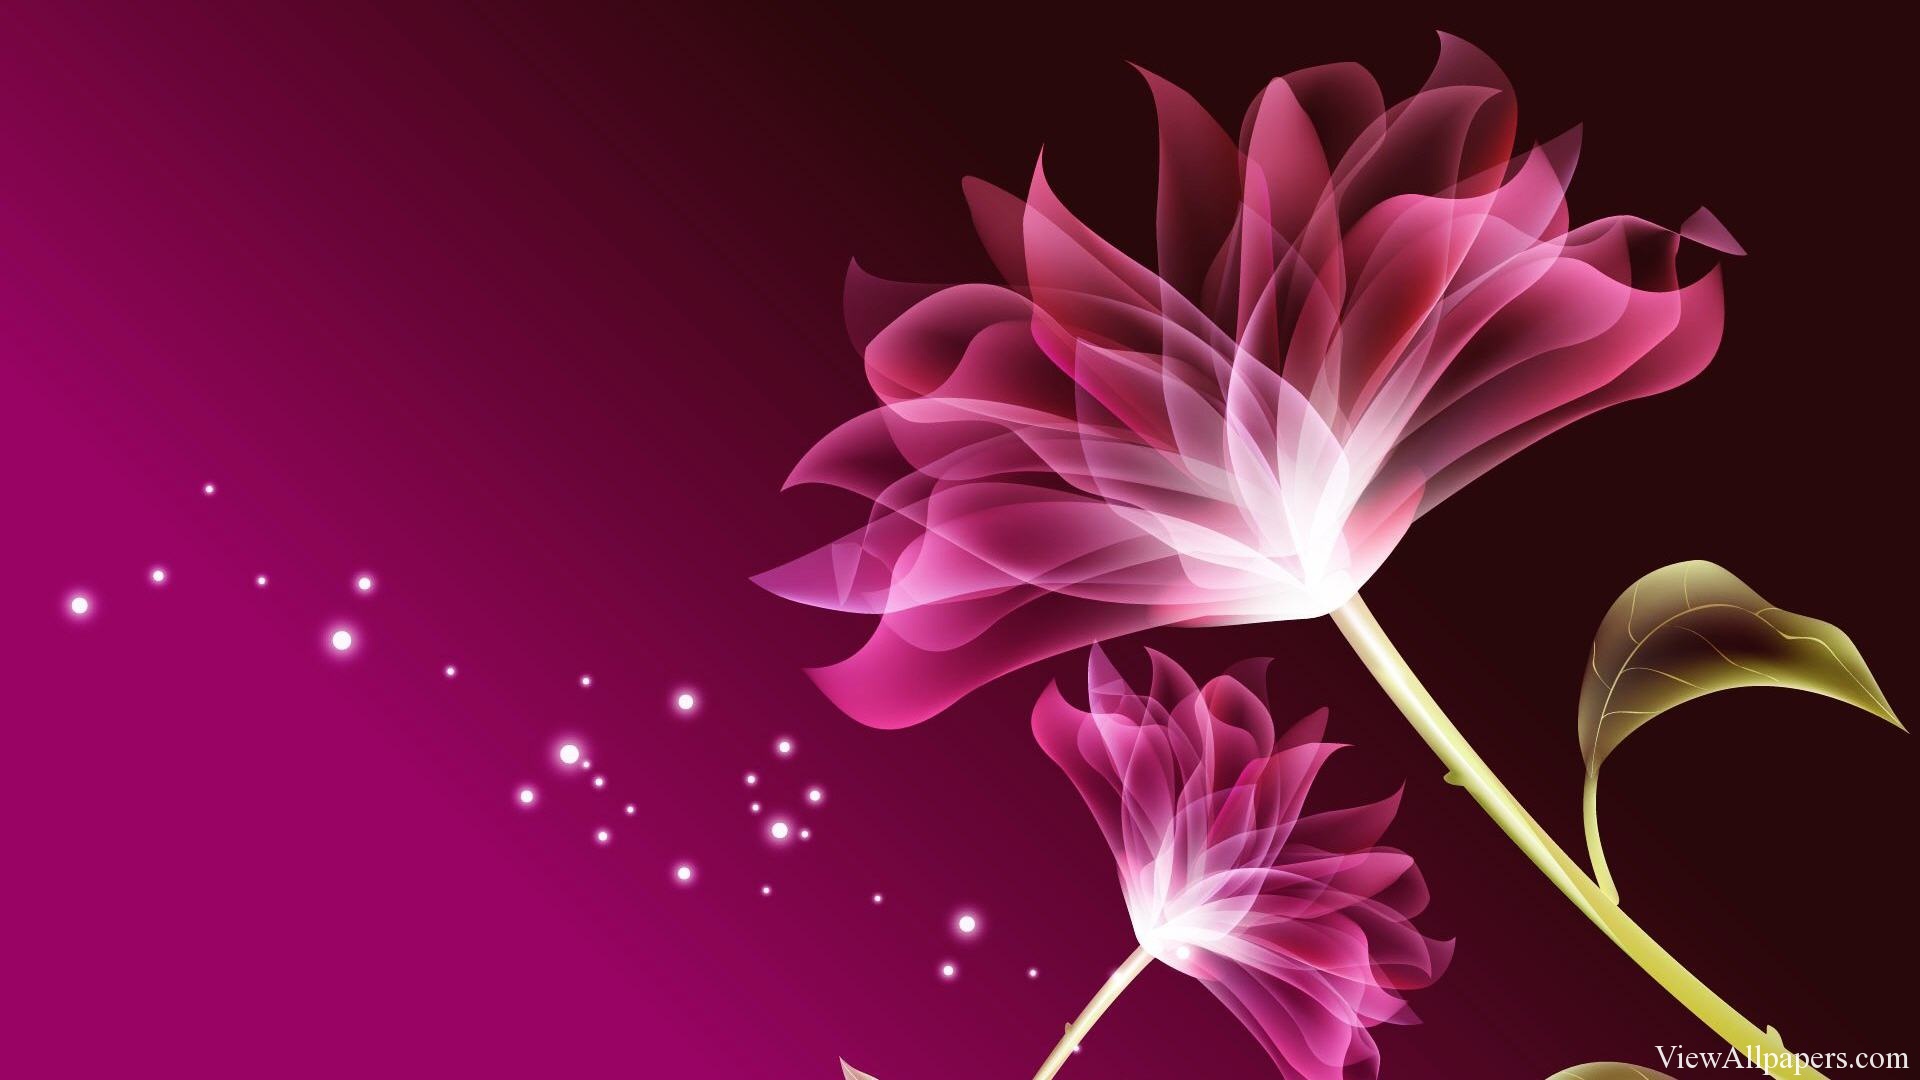 Images wallpapers for desktop 3d flowers page 4 1920x1080